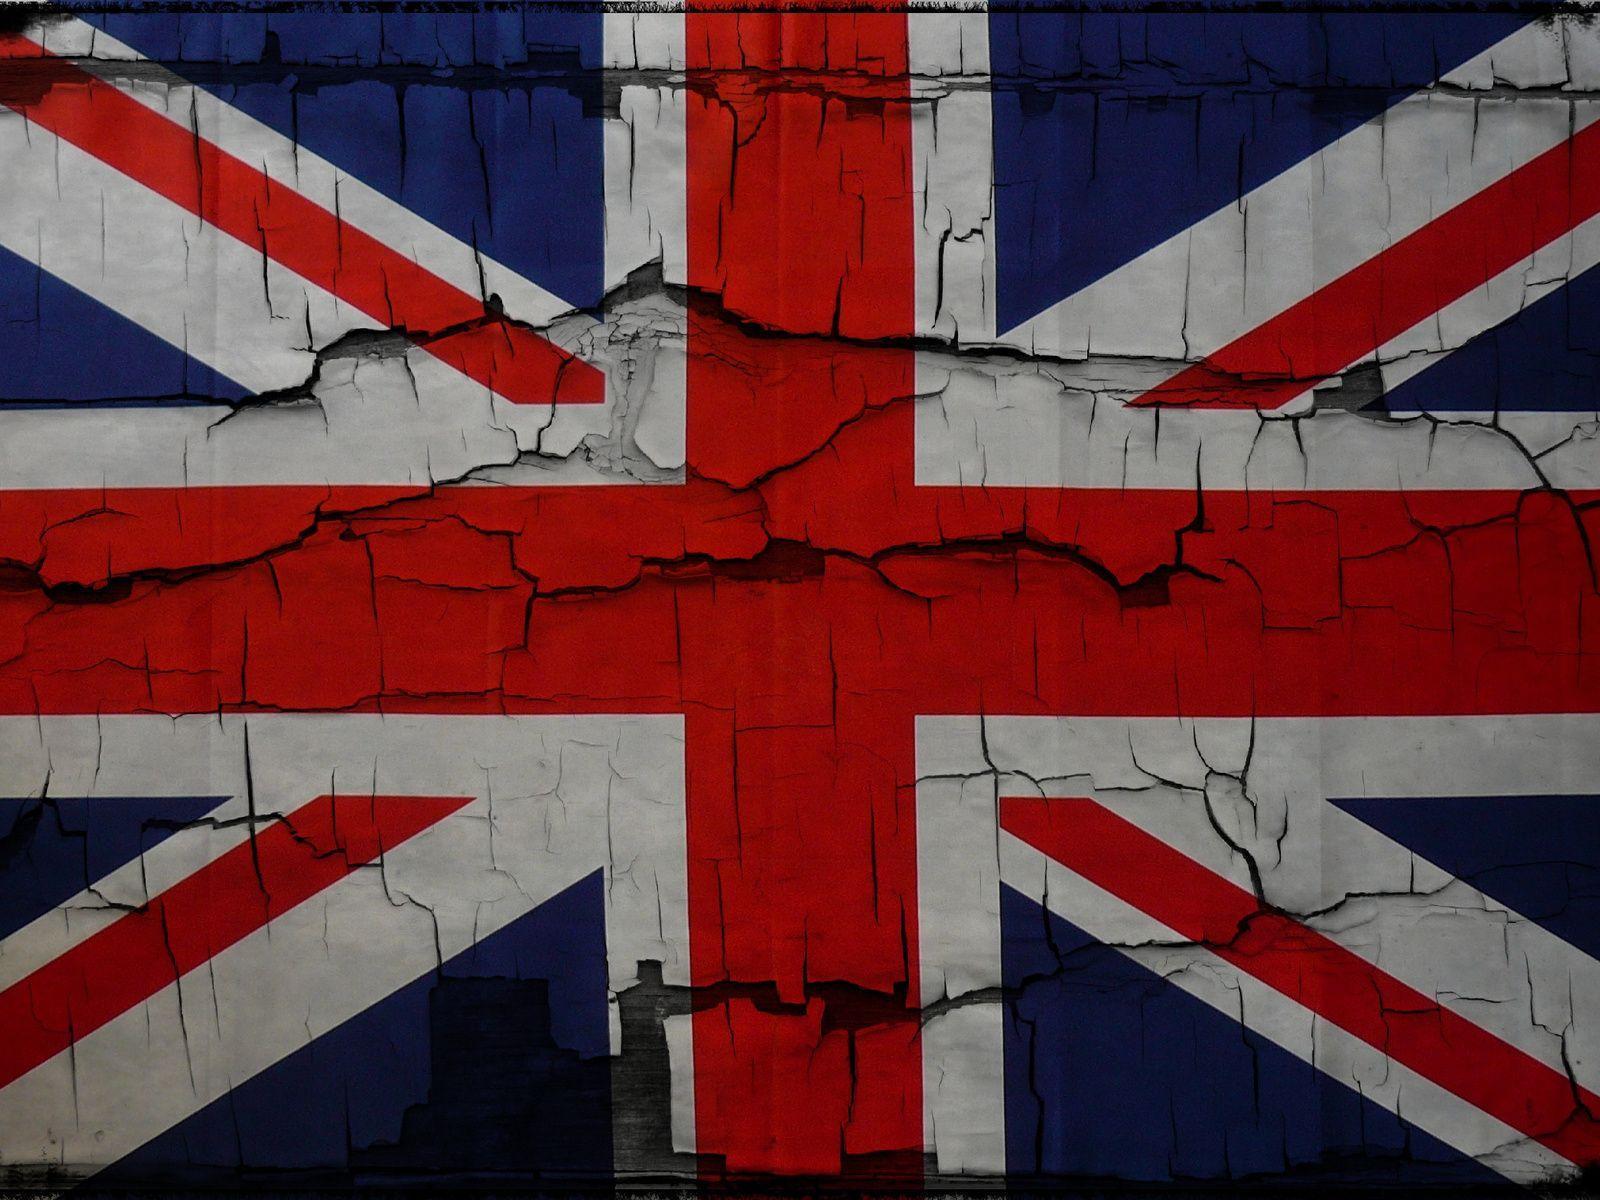 HD UK Wallpaper Depict The beautiful Image Of British Imperialism